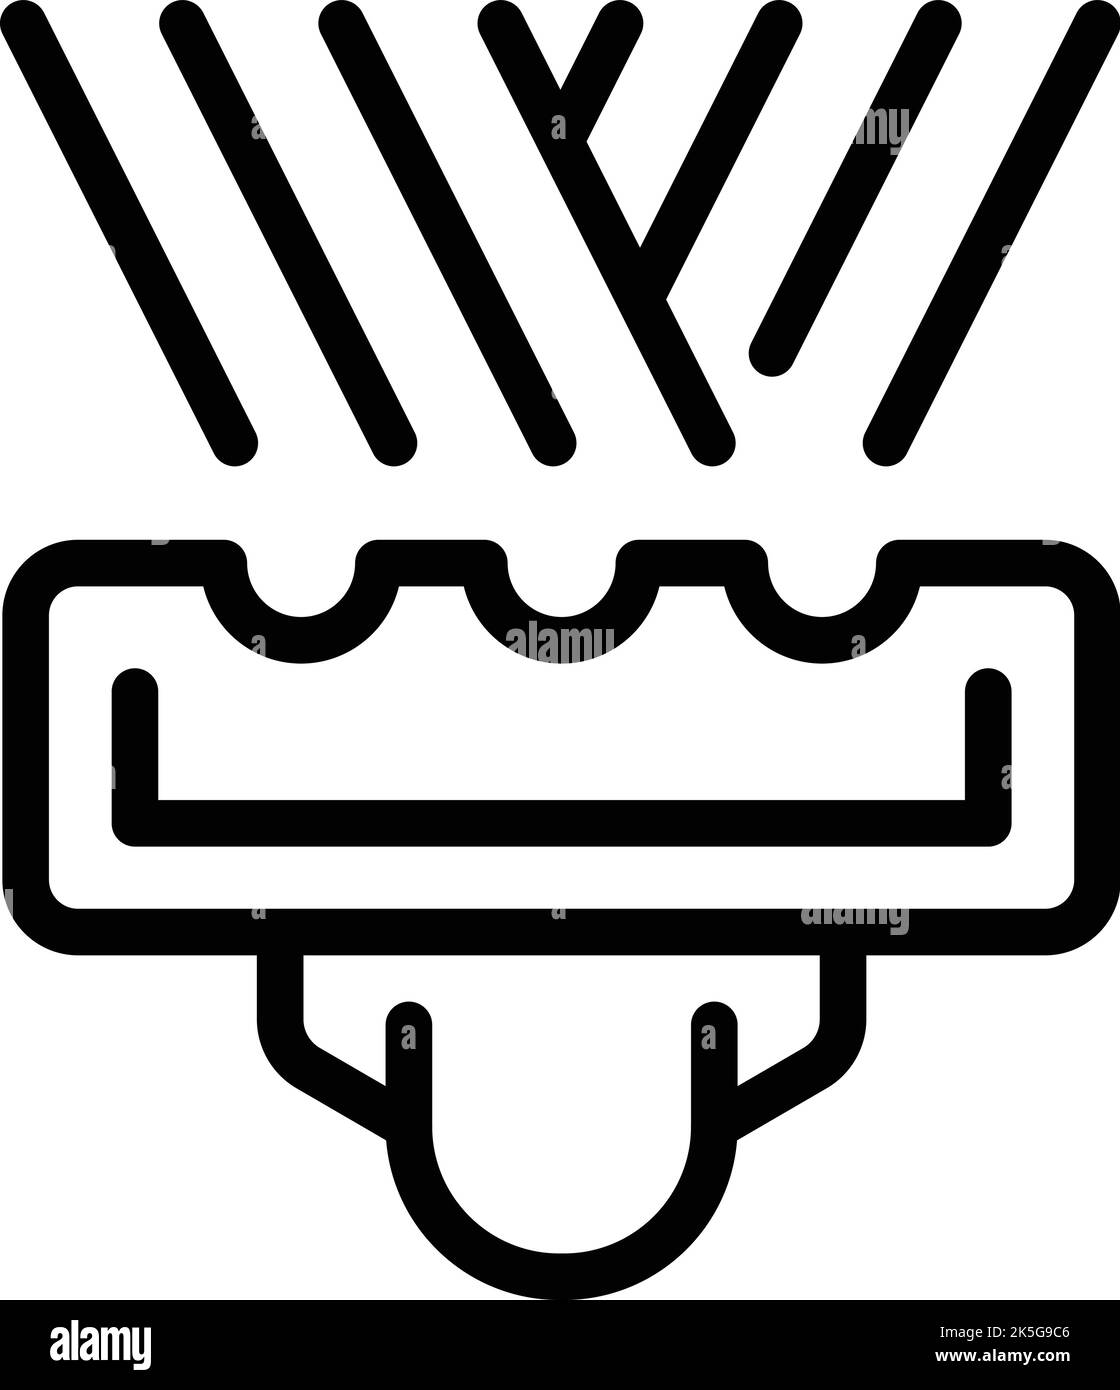 A black and white illustration of a rubber spatula Stock Photo - Alamy